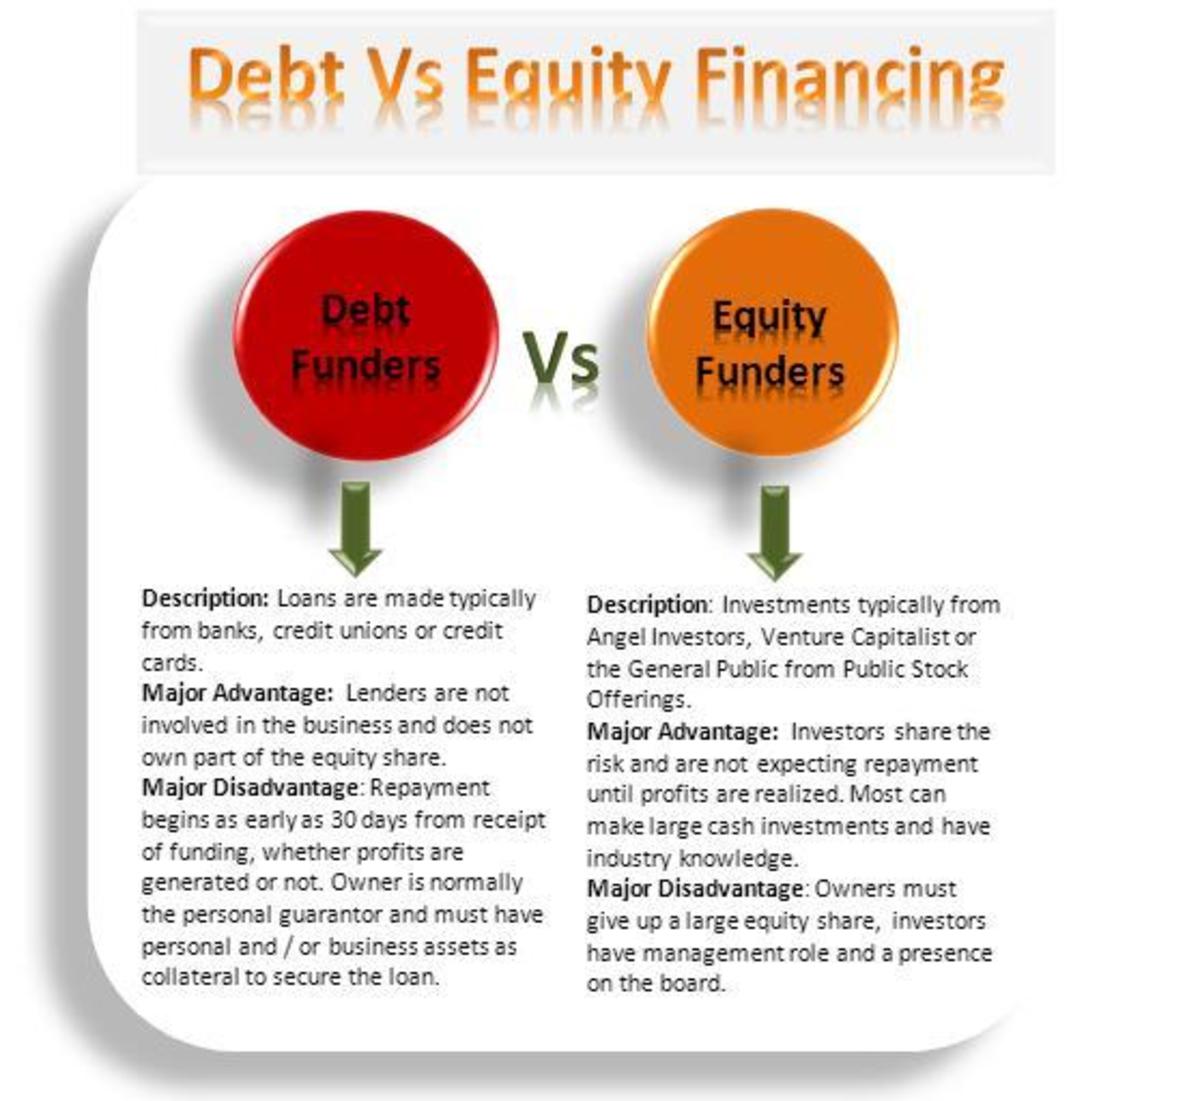 Debt Vs Equity Financing Which Is Best for Your Business